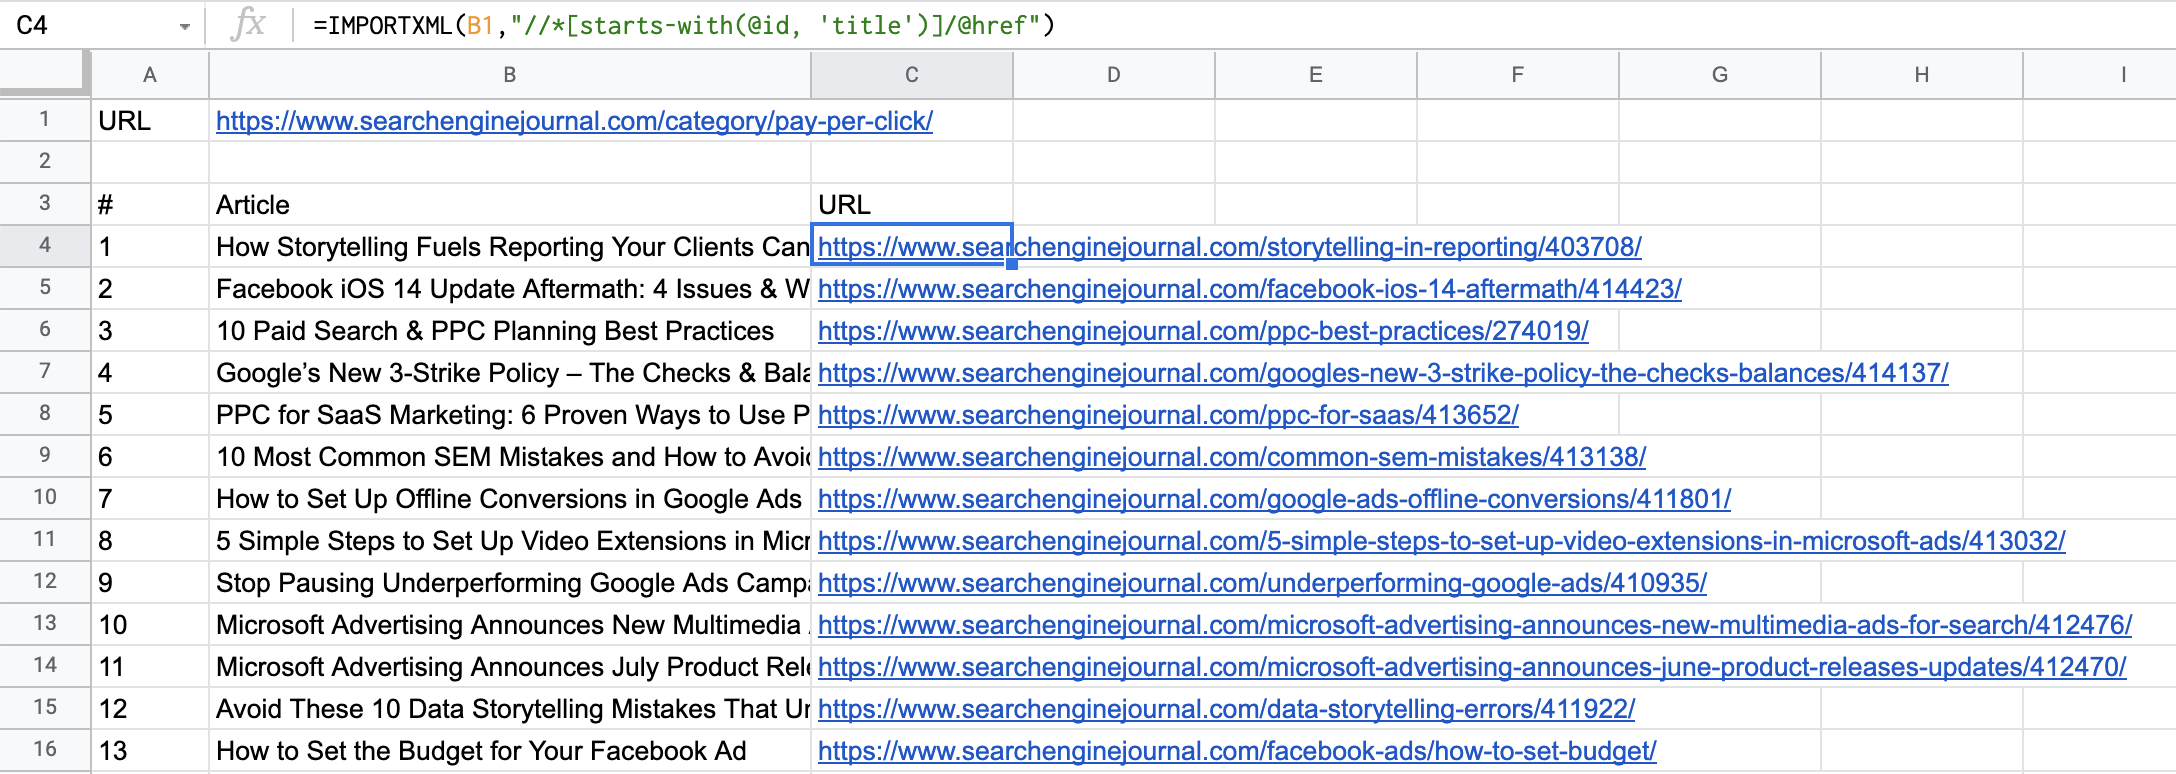 Articles and URLs Imported in Google Sheets.